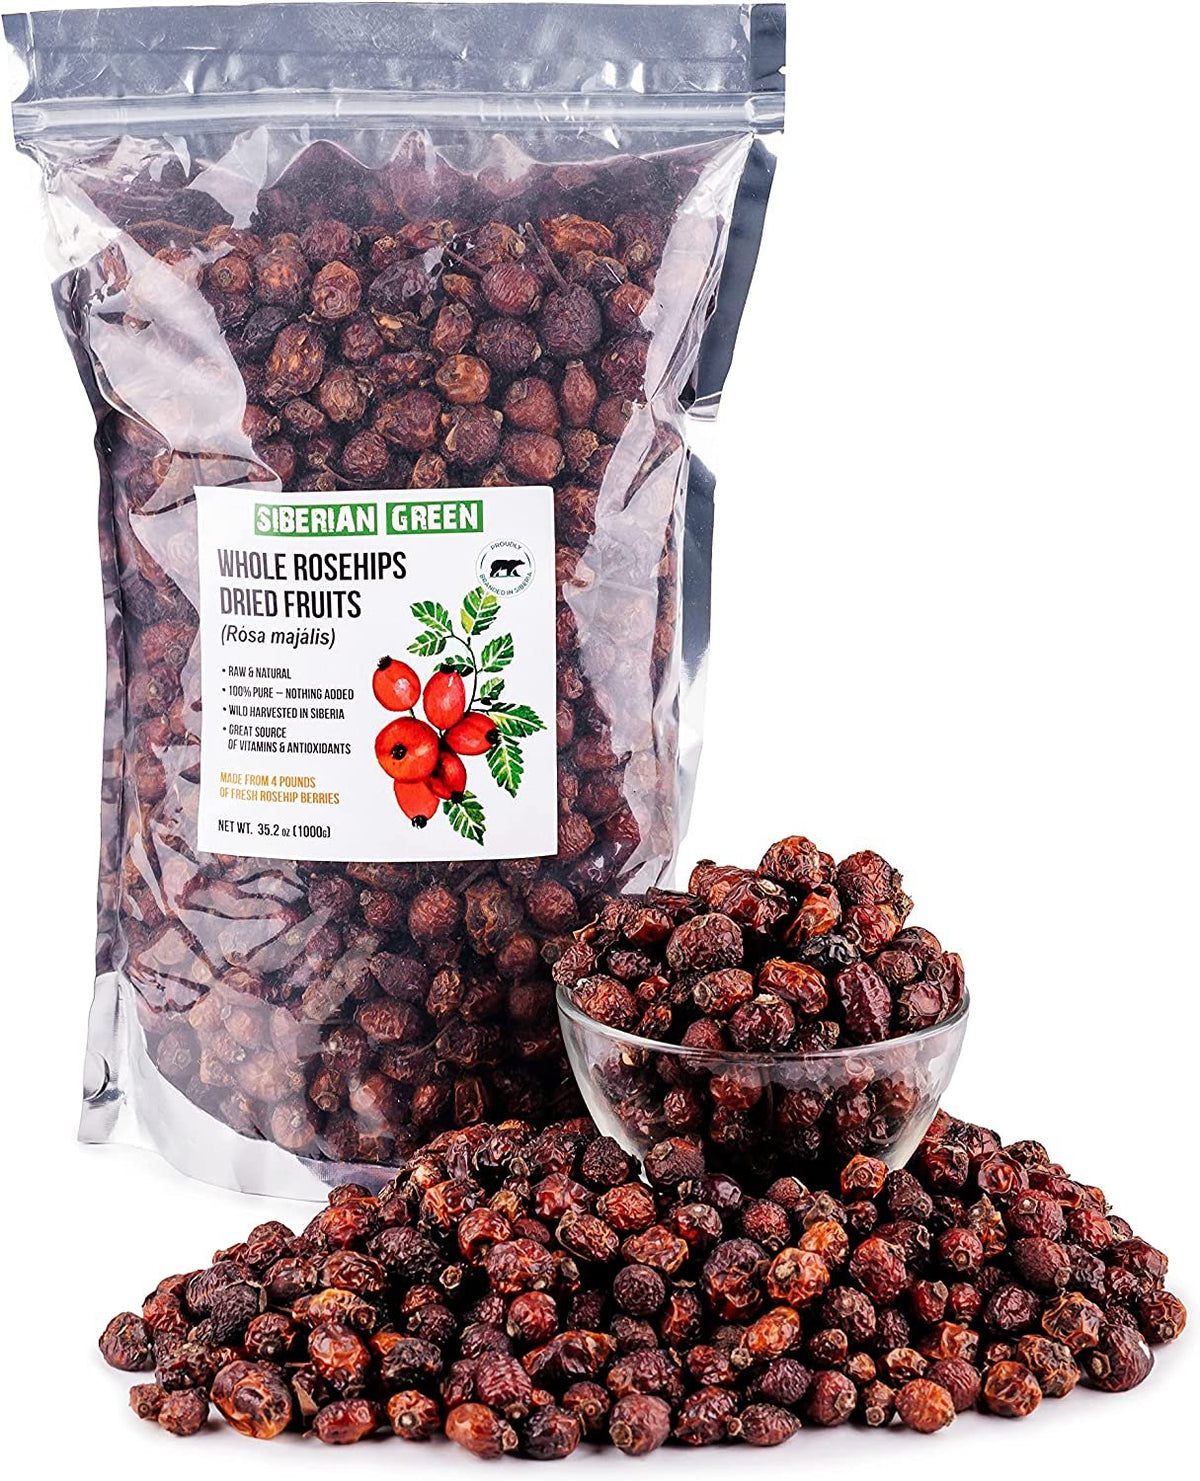 Siberian Dried Rose Hips Whole 1 kg (2.2 lbs) - Rosehips Herbal Berries Tea Directly from Altai Mountains and Taiga